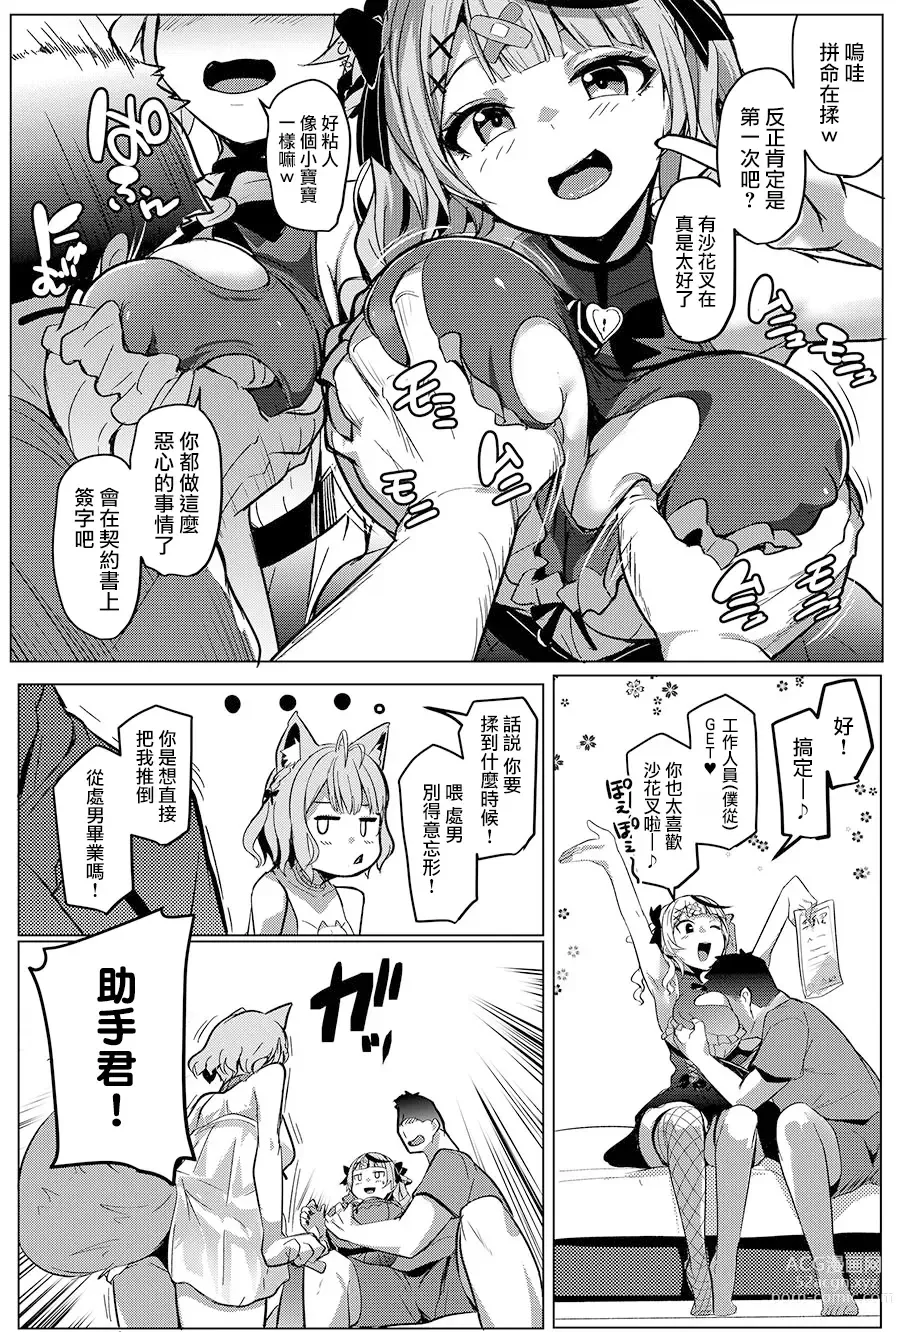 Page 5 of doujinshi Osucollab 2